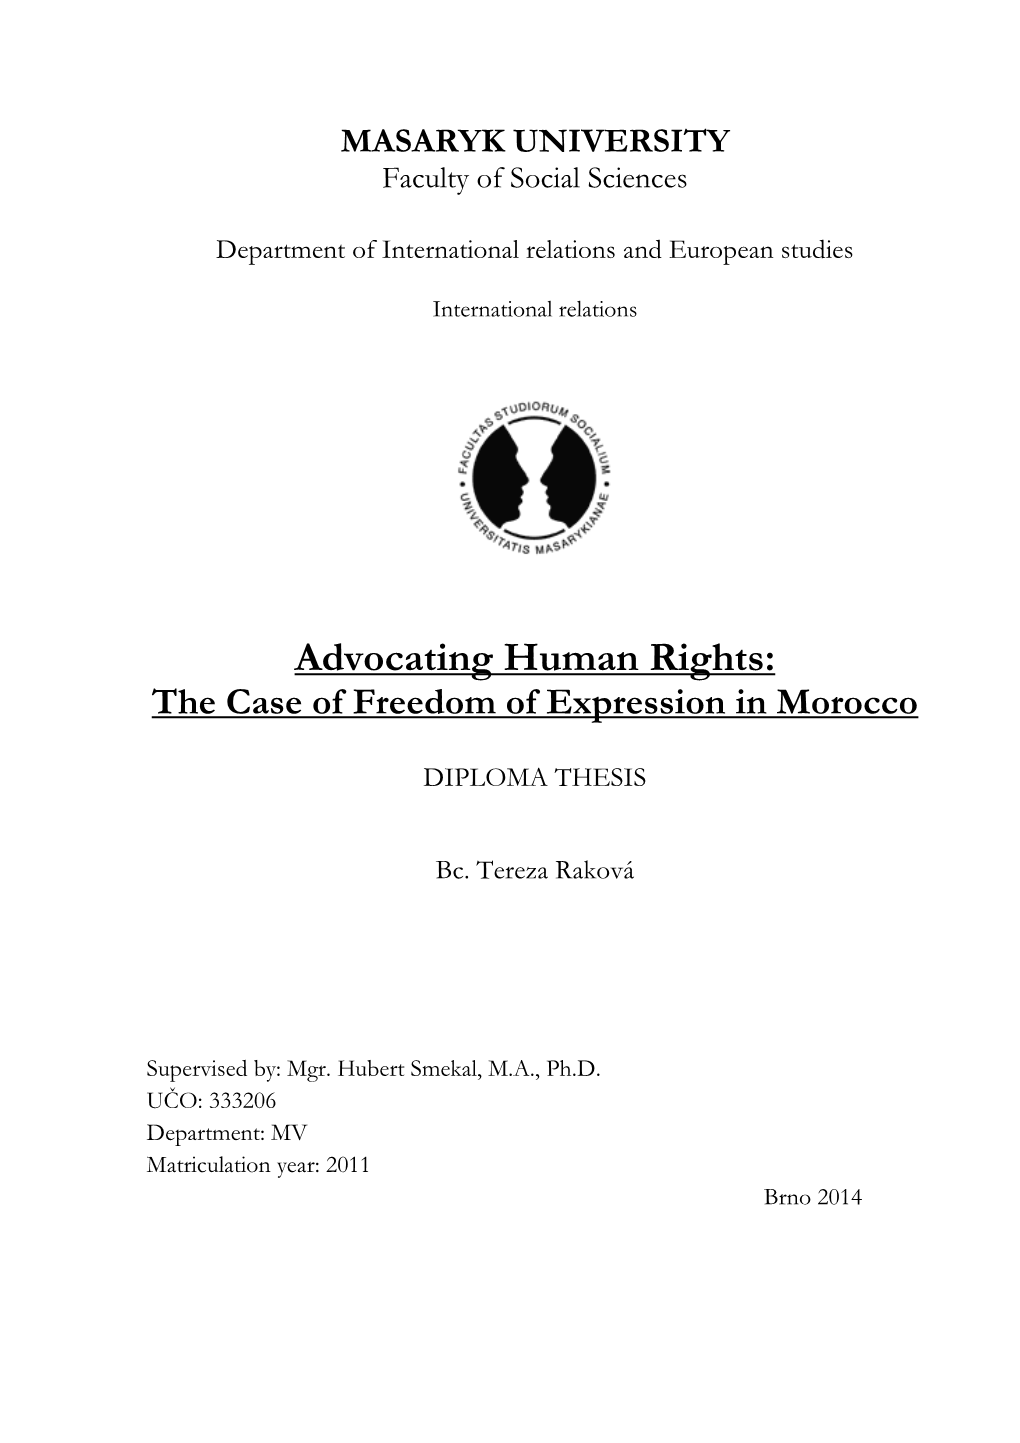 Advocating Human Rights: the Case of Freedom of Expression in Morocco